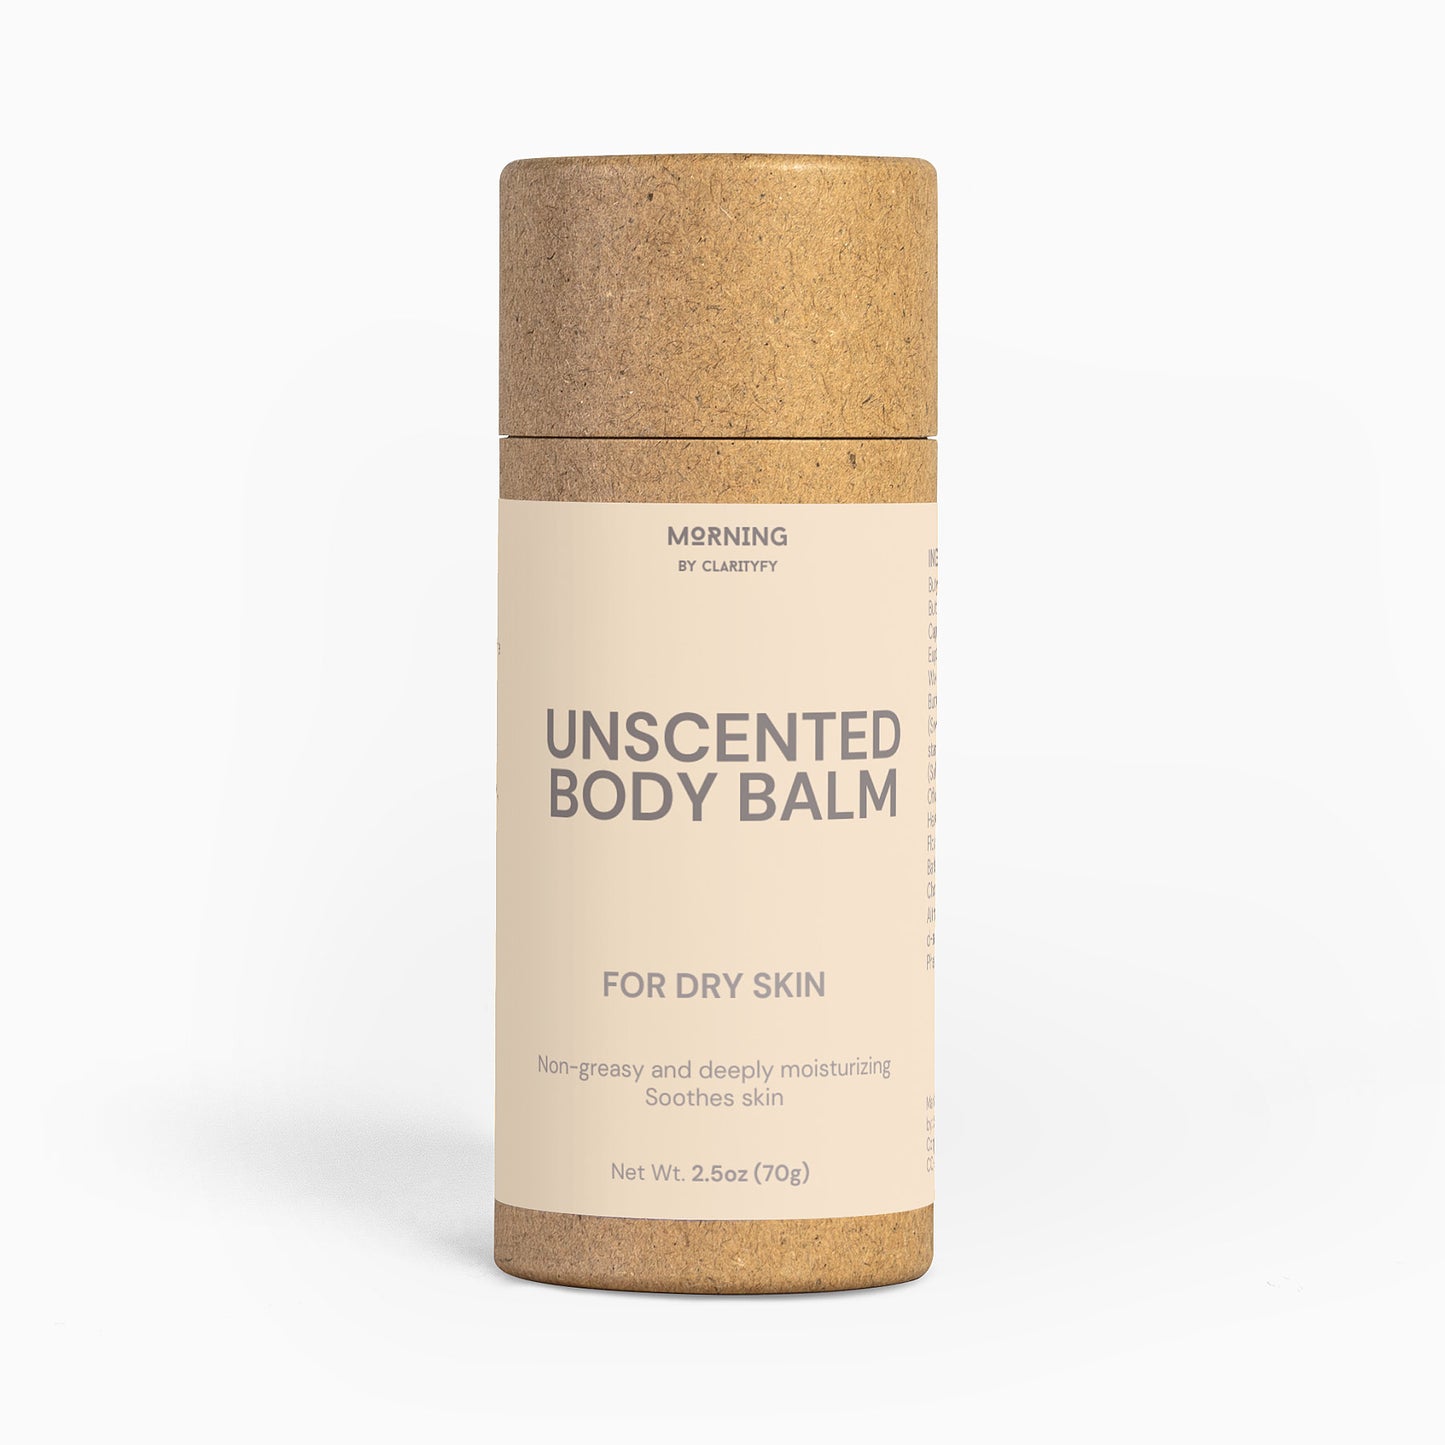 Unscented Body Balm | Clarityfy